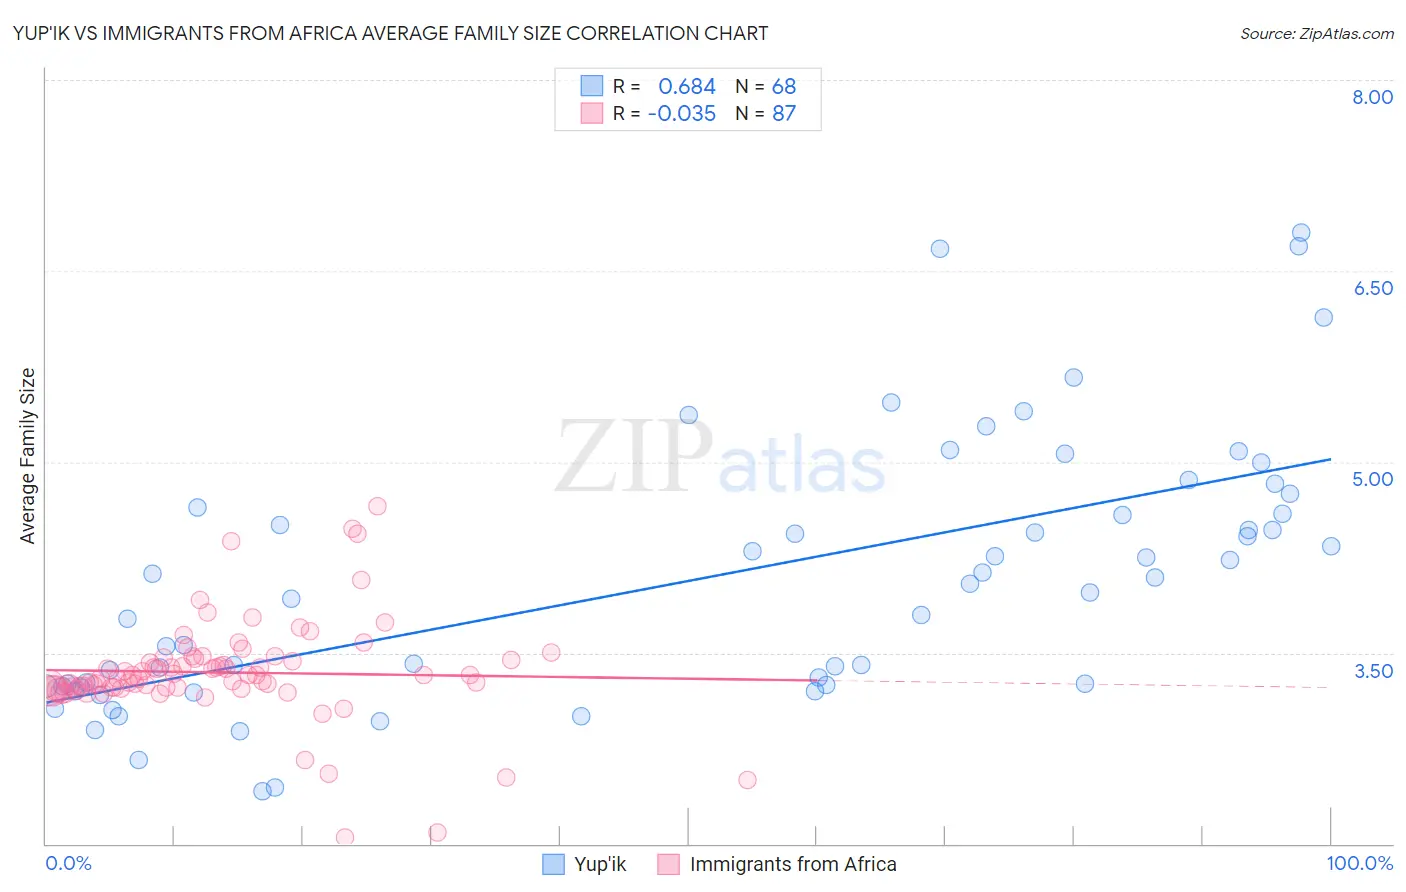 Yup'ik vs Immigrants from Africa Average Family Size